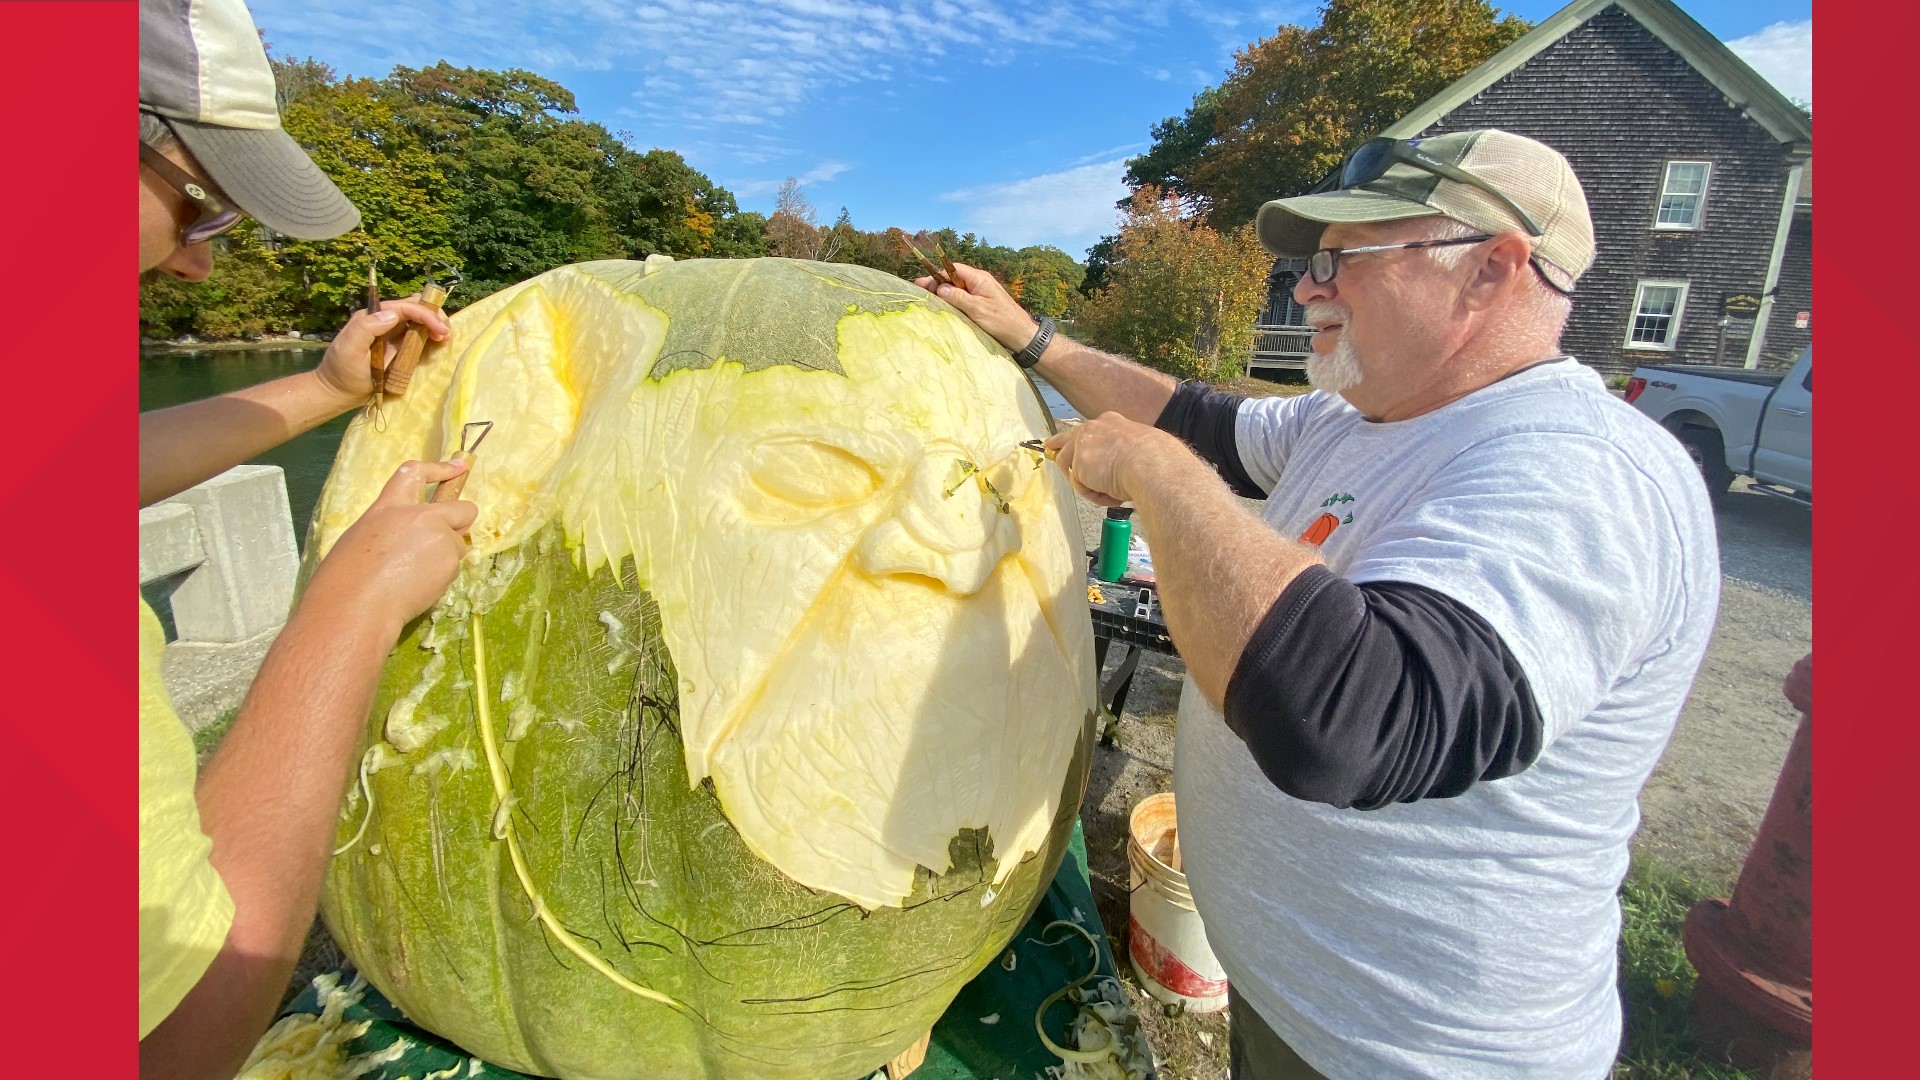 Artists, huge pumpkins, and sunny weather are the star attractions of the annual Damariscotta Pumpkinfest and Regatta.